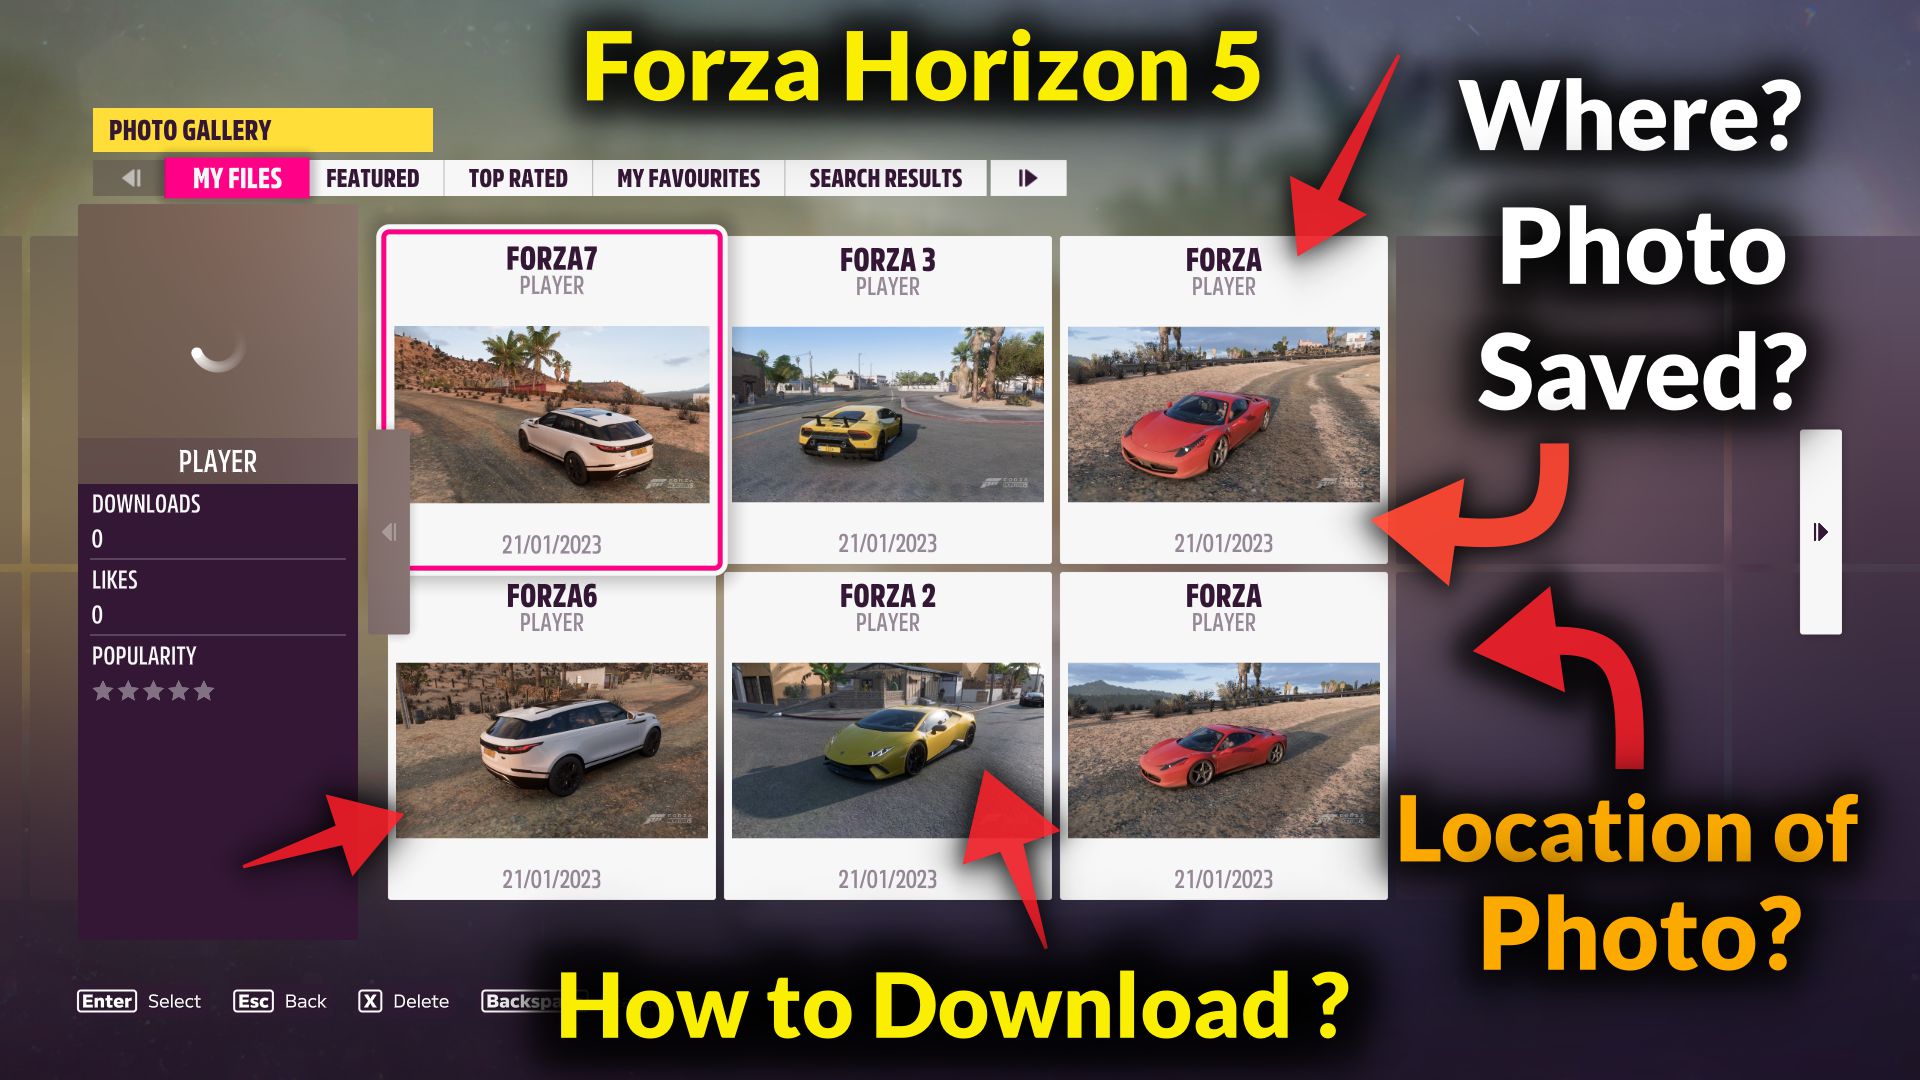 Forza Horizon 5 - where to find Photos & How to Save or Download